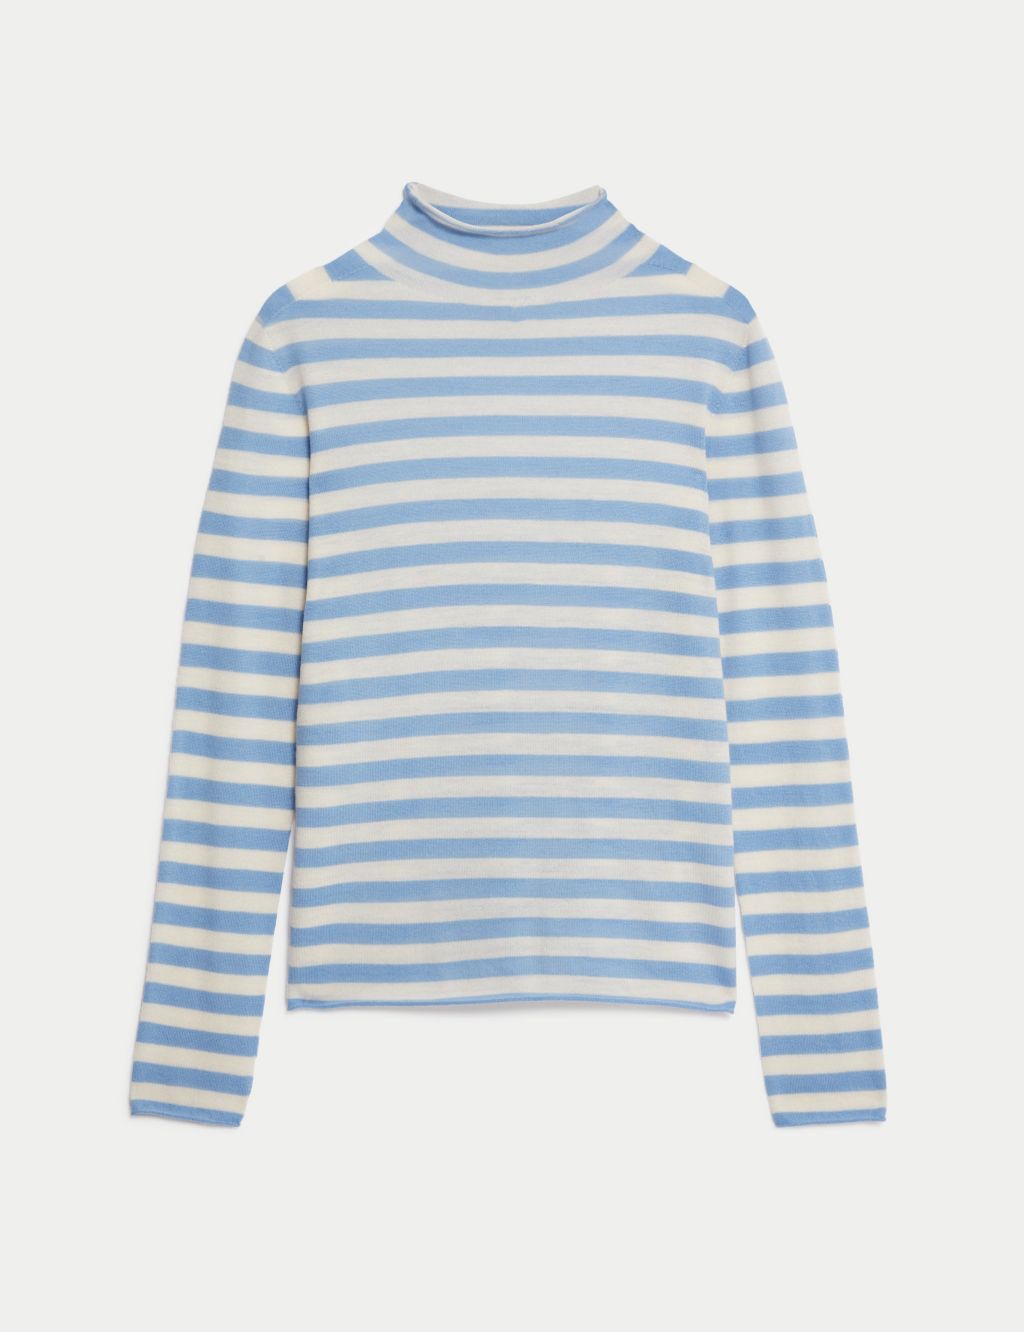 Wool Rich Striped Jumper with Cashmere image 2